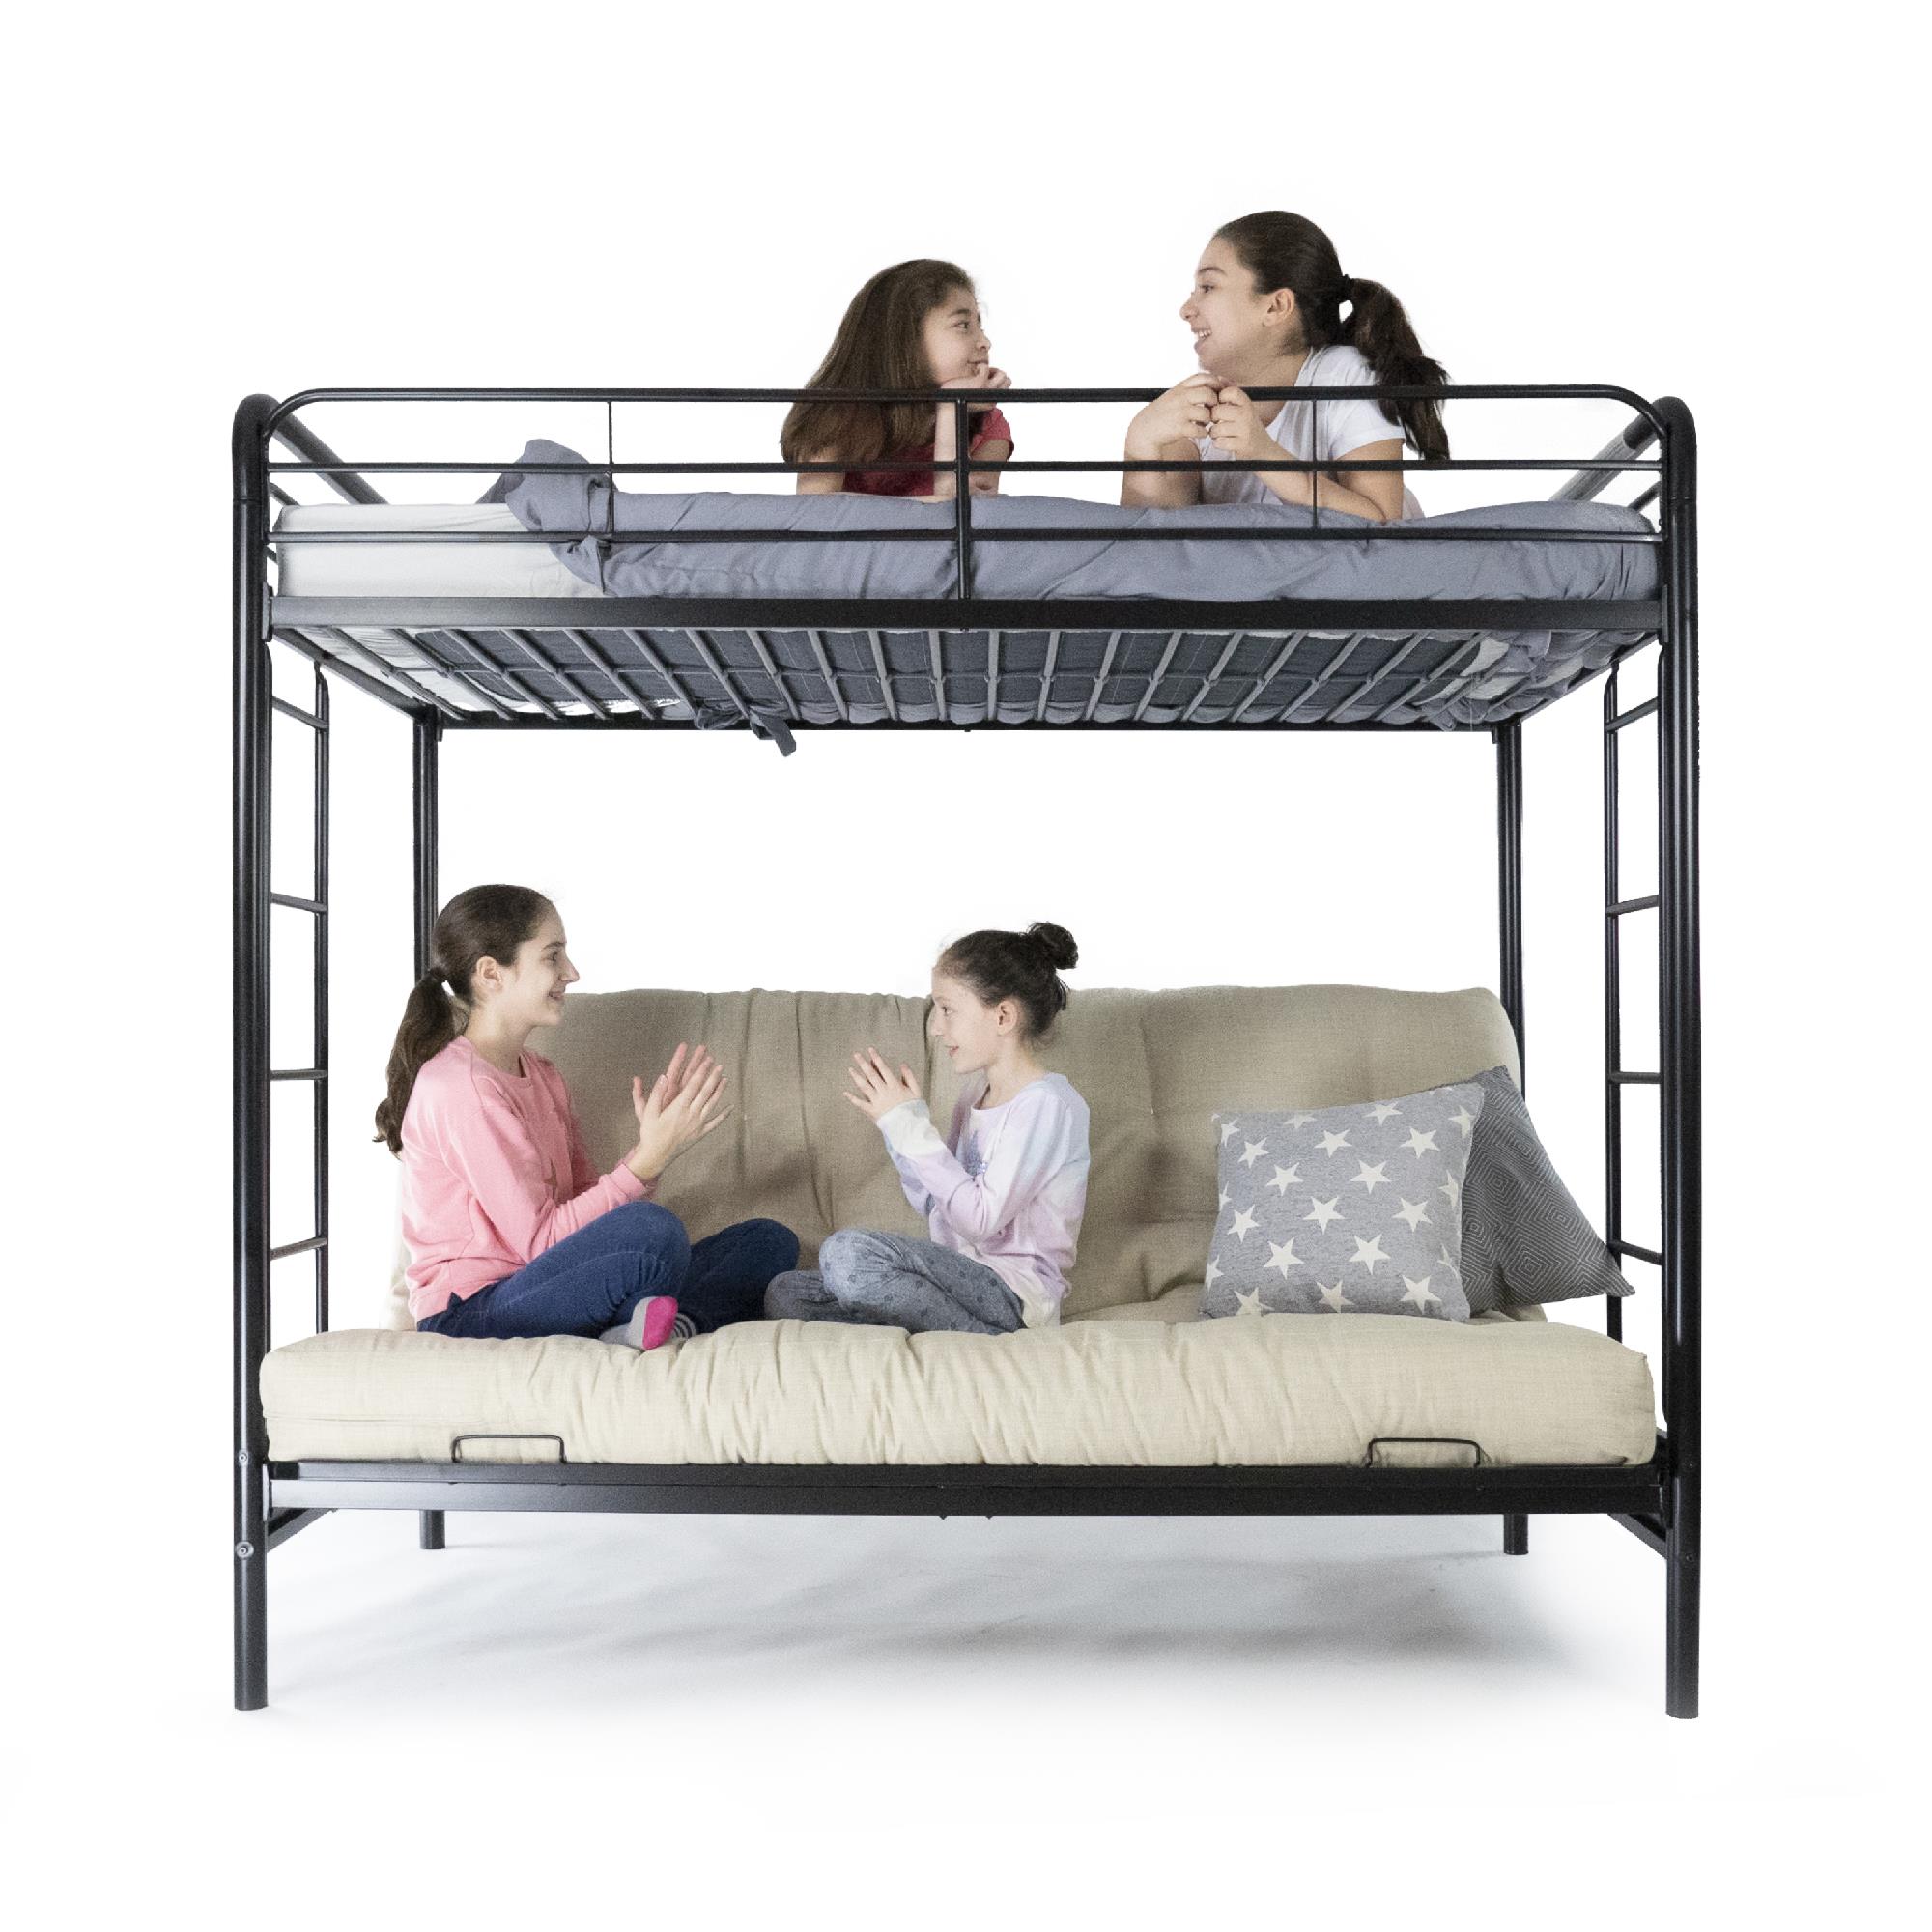 DHP Sammie Twin over Futon Metal Bunk Bed, Black - image 4 of 14